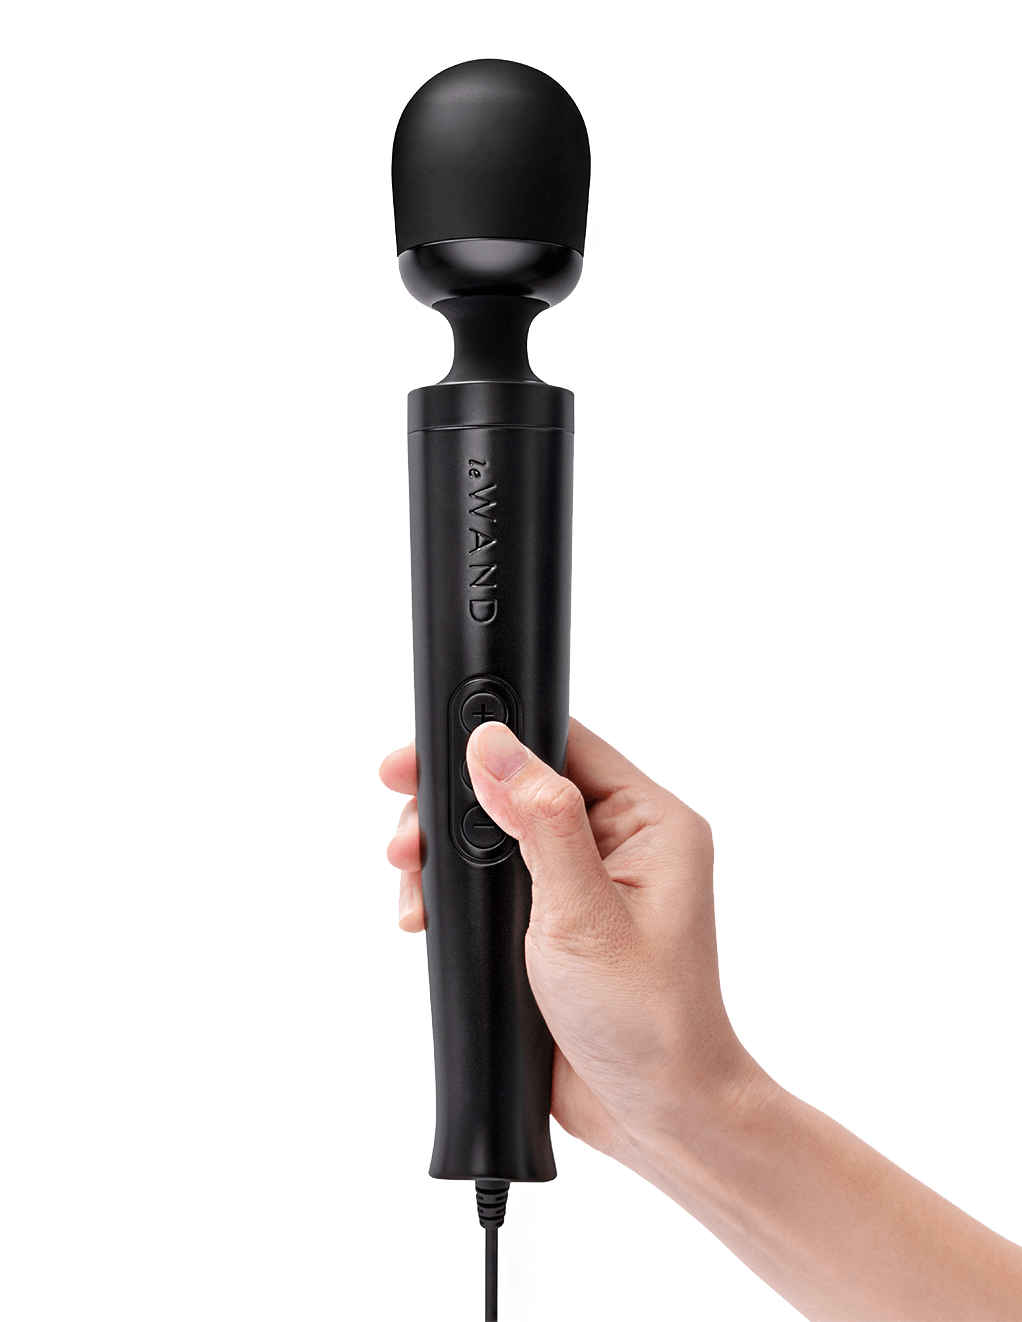 Le Wand Diecast Plug-In Vibrating Wand - Black - In Hand